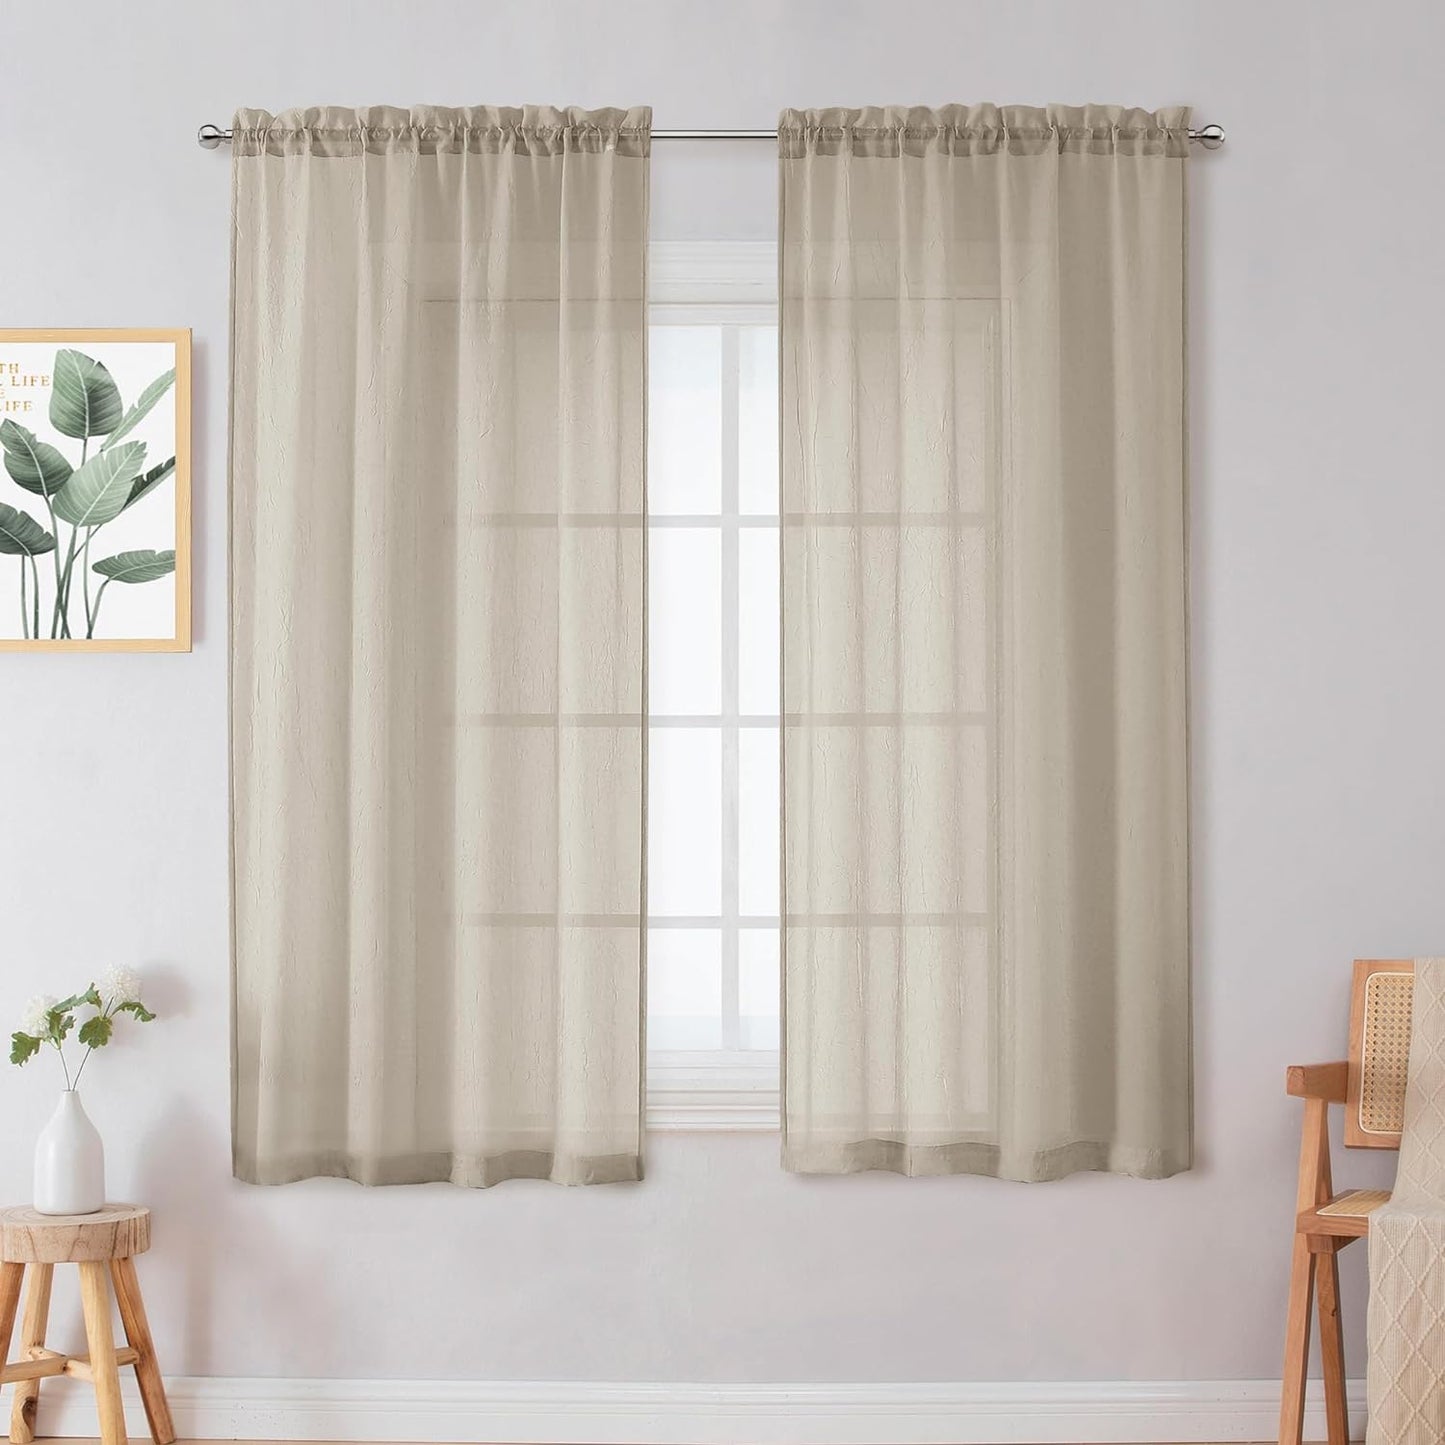 Chyhomenyc Crushed White Sheer Valances for Window 14 Inch Length 2 PCS, Crinkle Voile Short Kitchen Curtains with Dual Rod Pockets，Gauzy Bedroom Curtain Valance，Each 42Wx14L Inches  Chyhomenyc Taupe 42 W X 63 L 